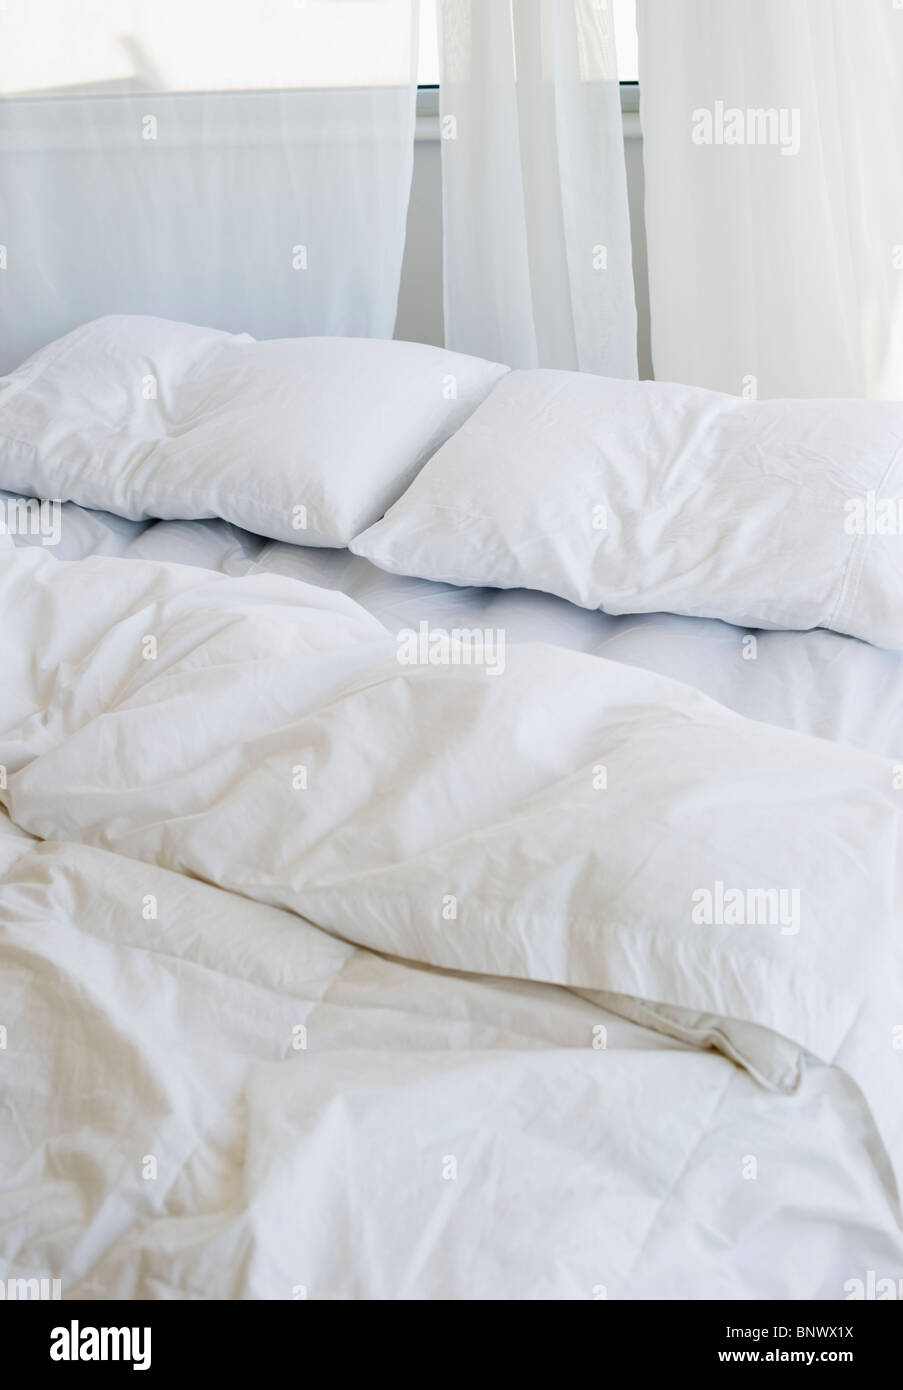 Bed with white linens Stock Photo